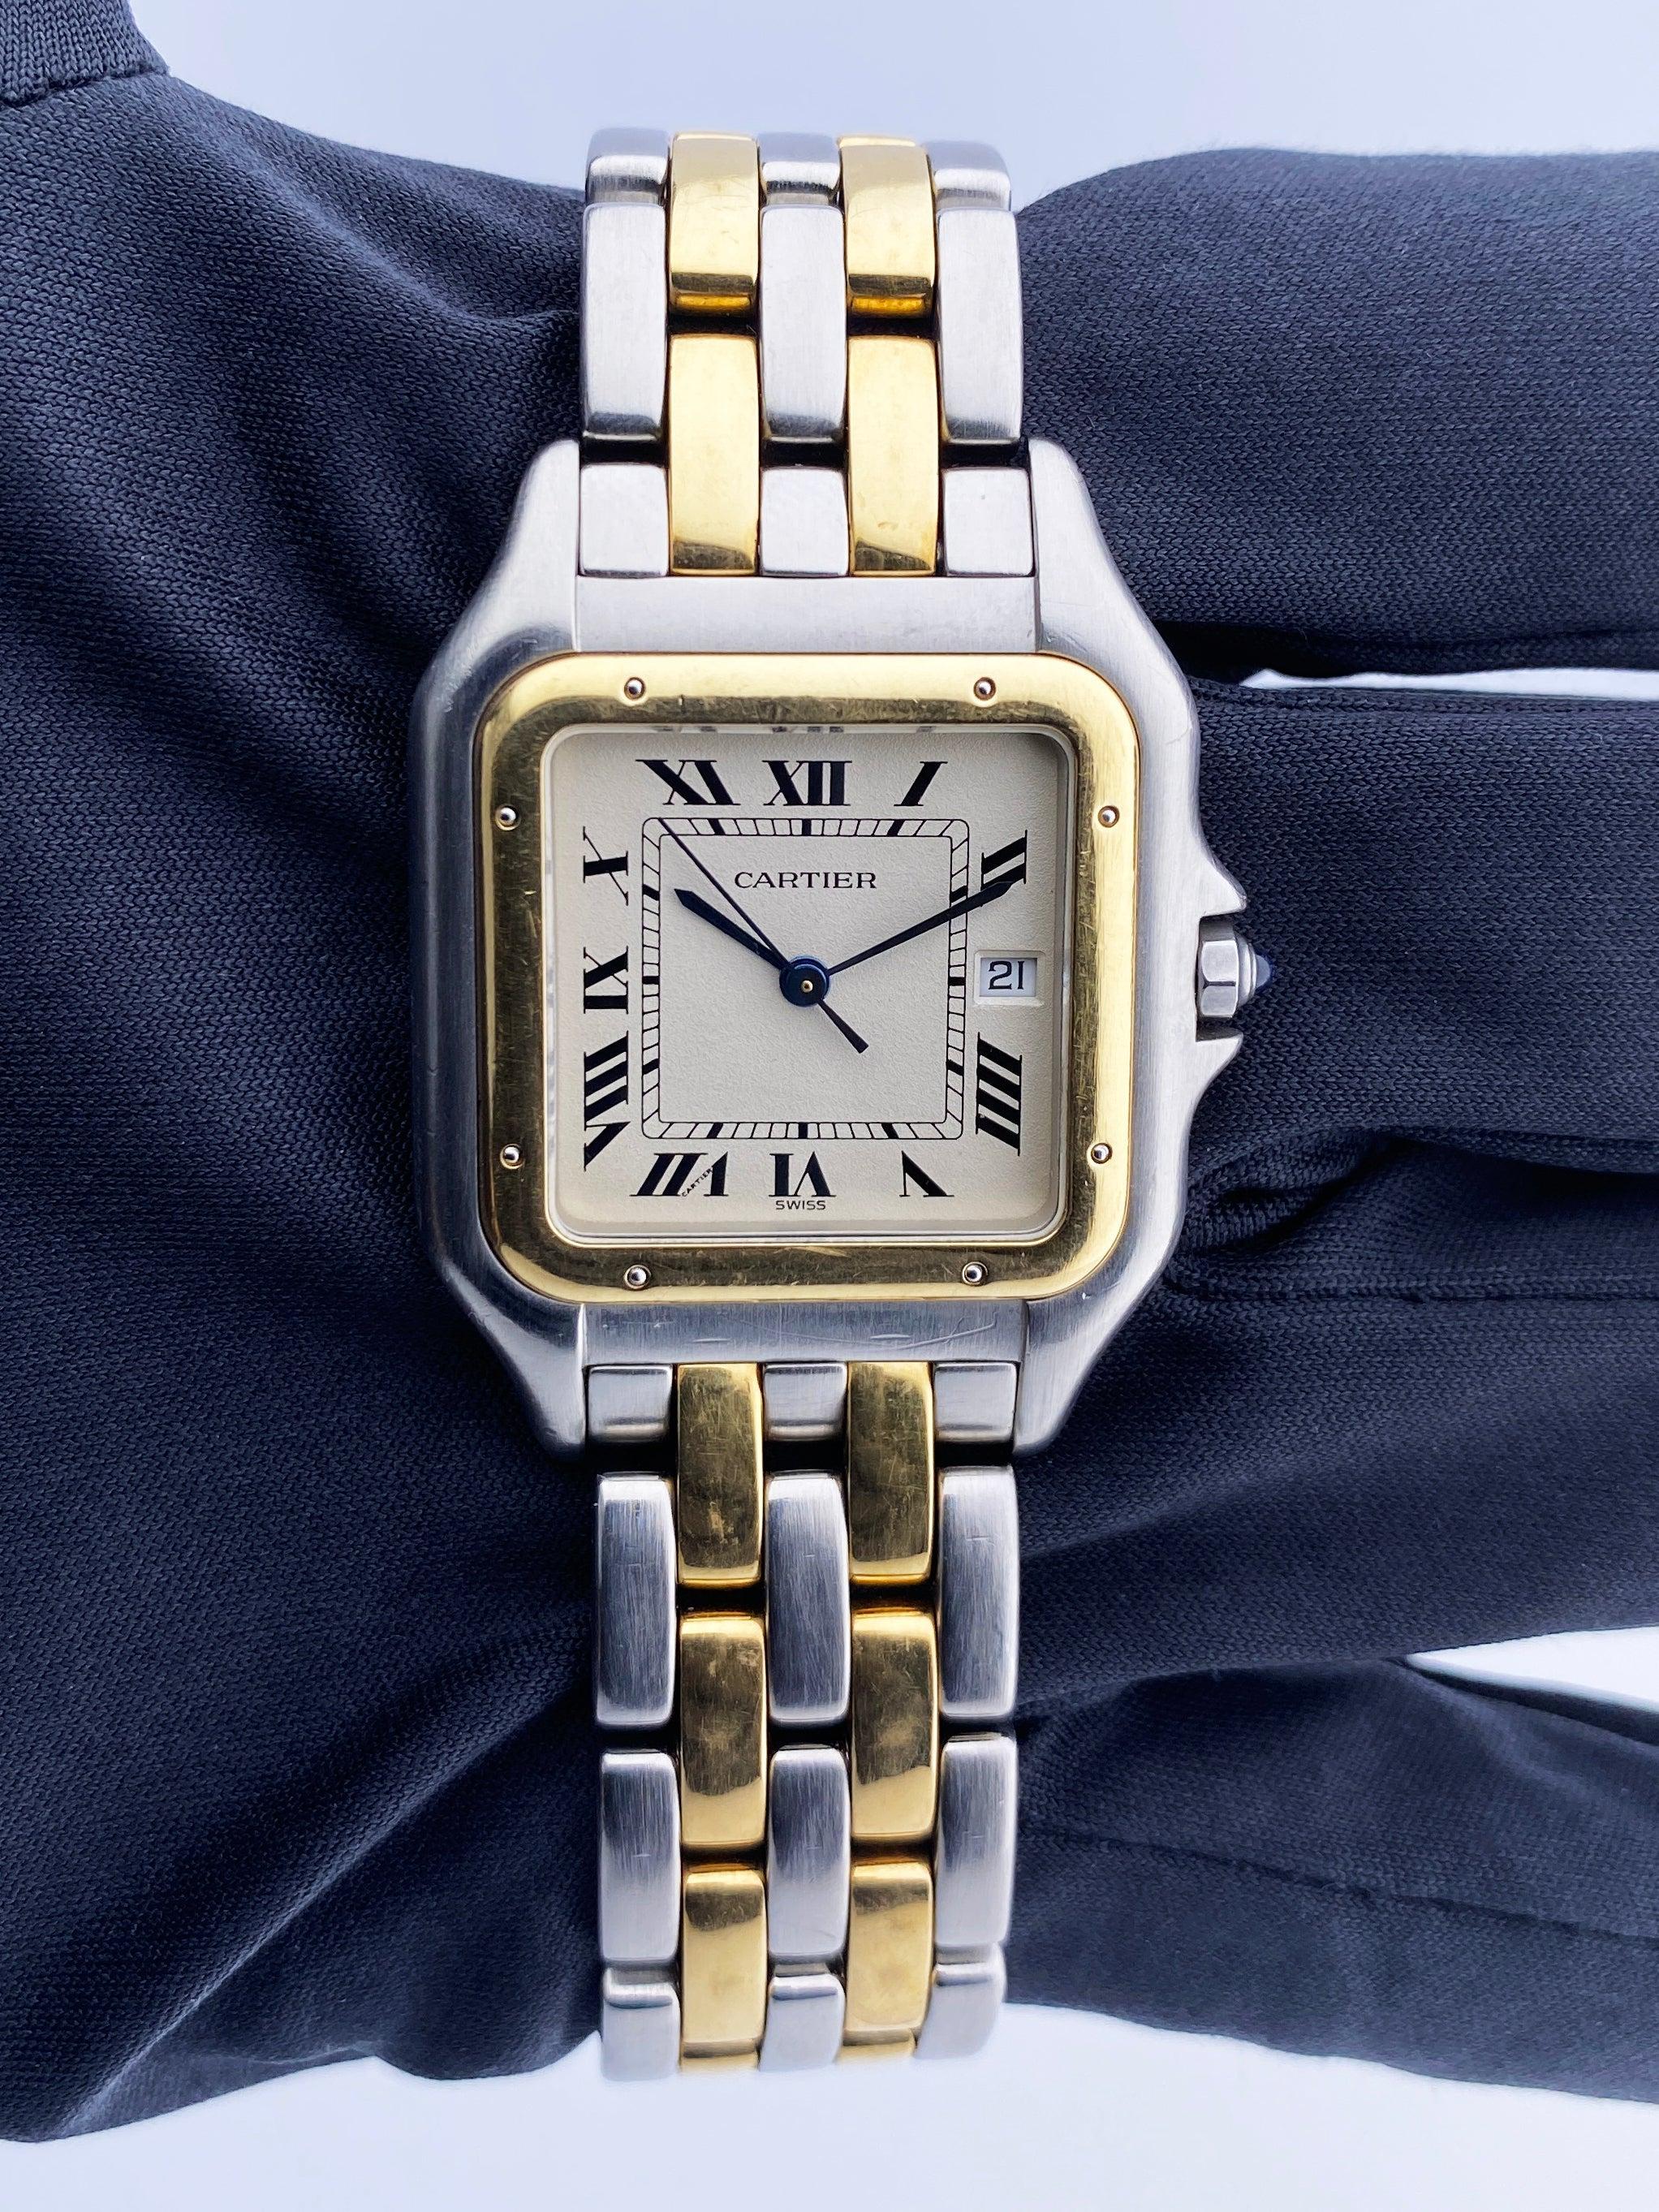 Cartier Panthere Jumbo Mens Watch. 29mm stainless steel case with 18K yellow gold smooth bezel. Off-White dial with blue steel hands and black Roman numeral hour markers. Minute markers on the inner dial. Date display at the 3 o'clock position. 18k